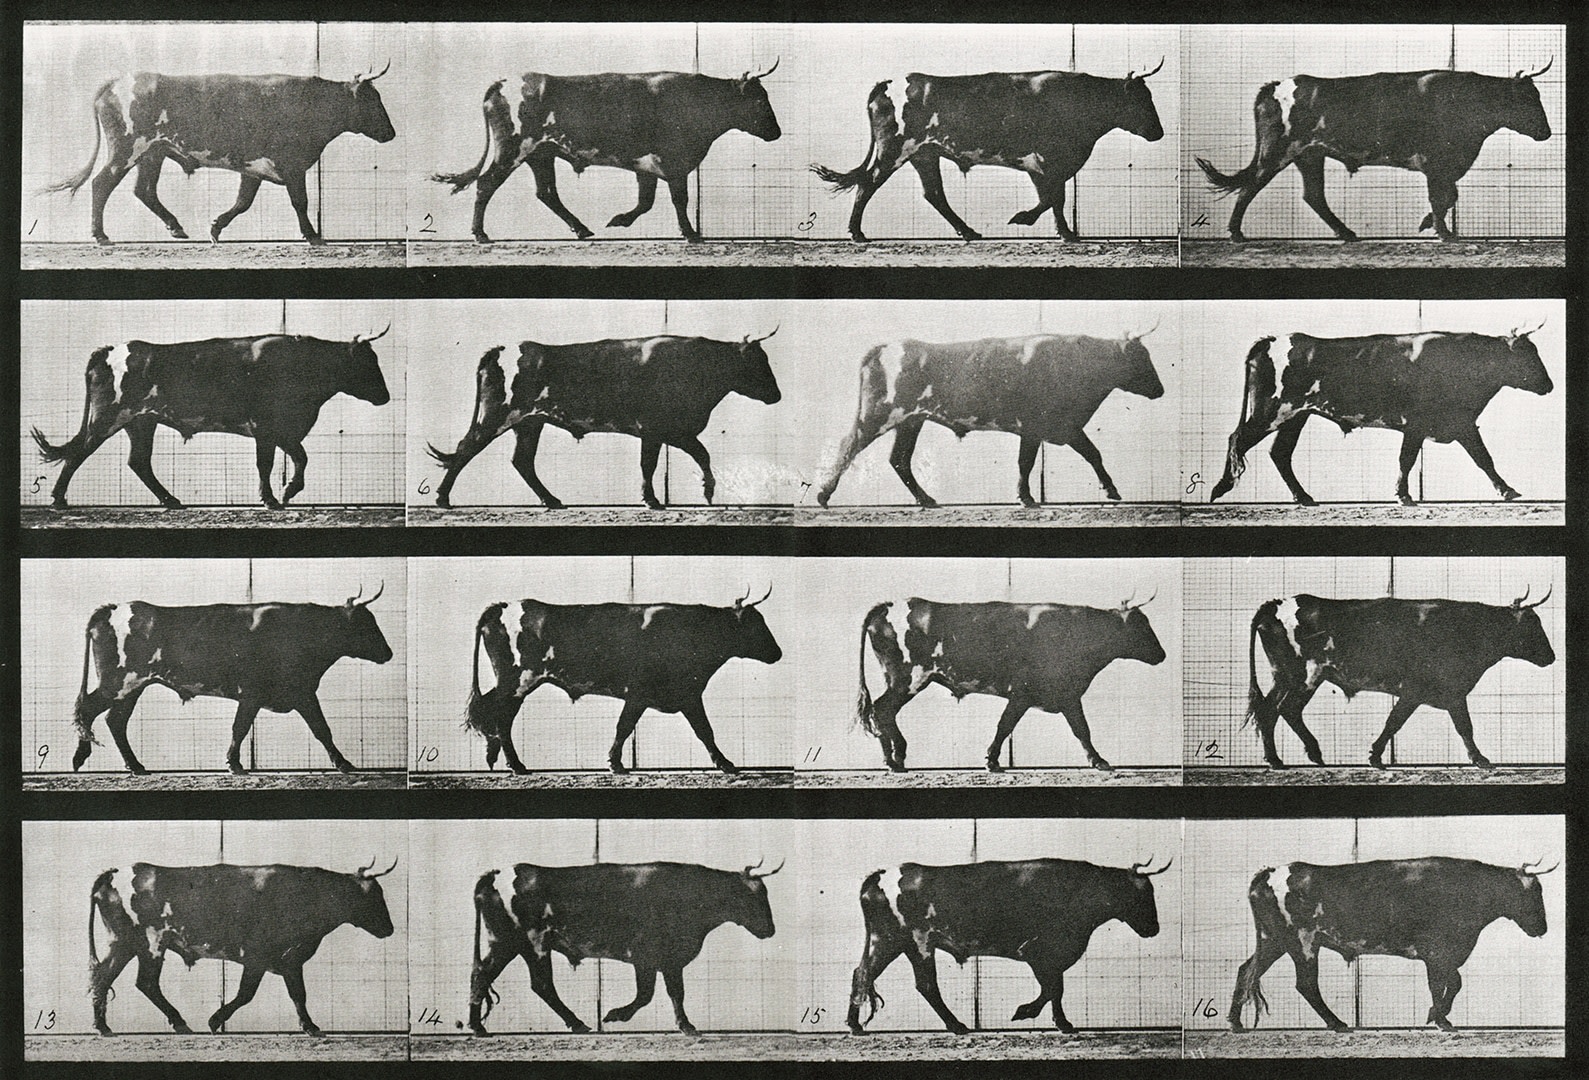 Sequence of black and white photos showing the movements of a walking ox